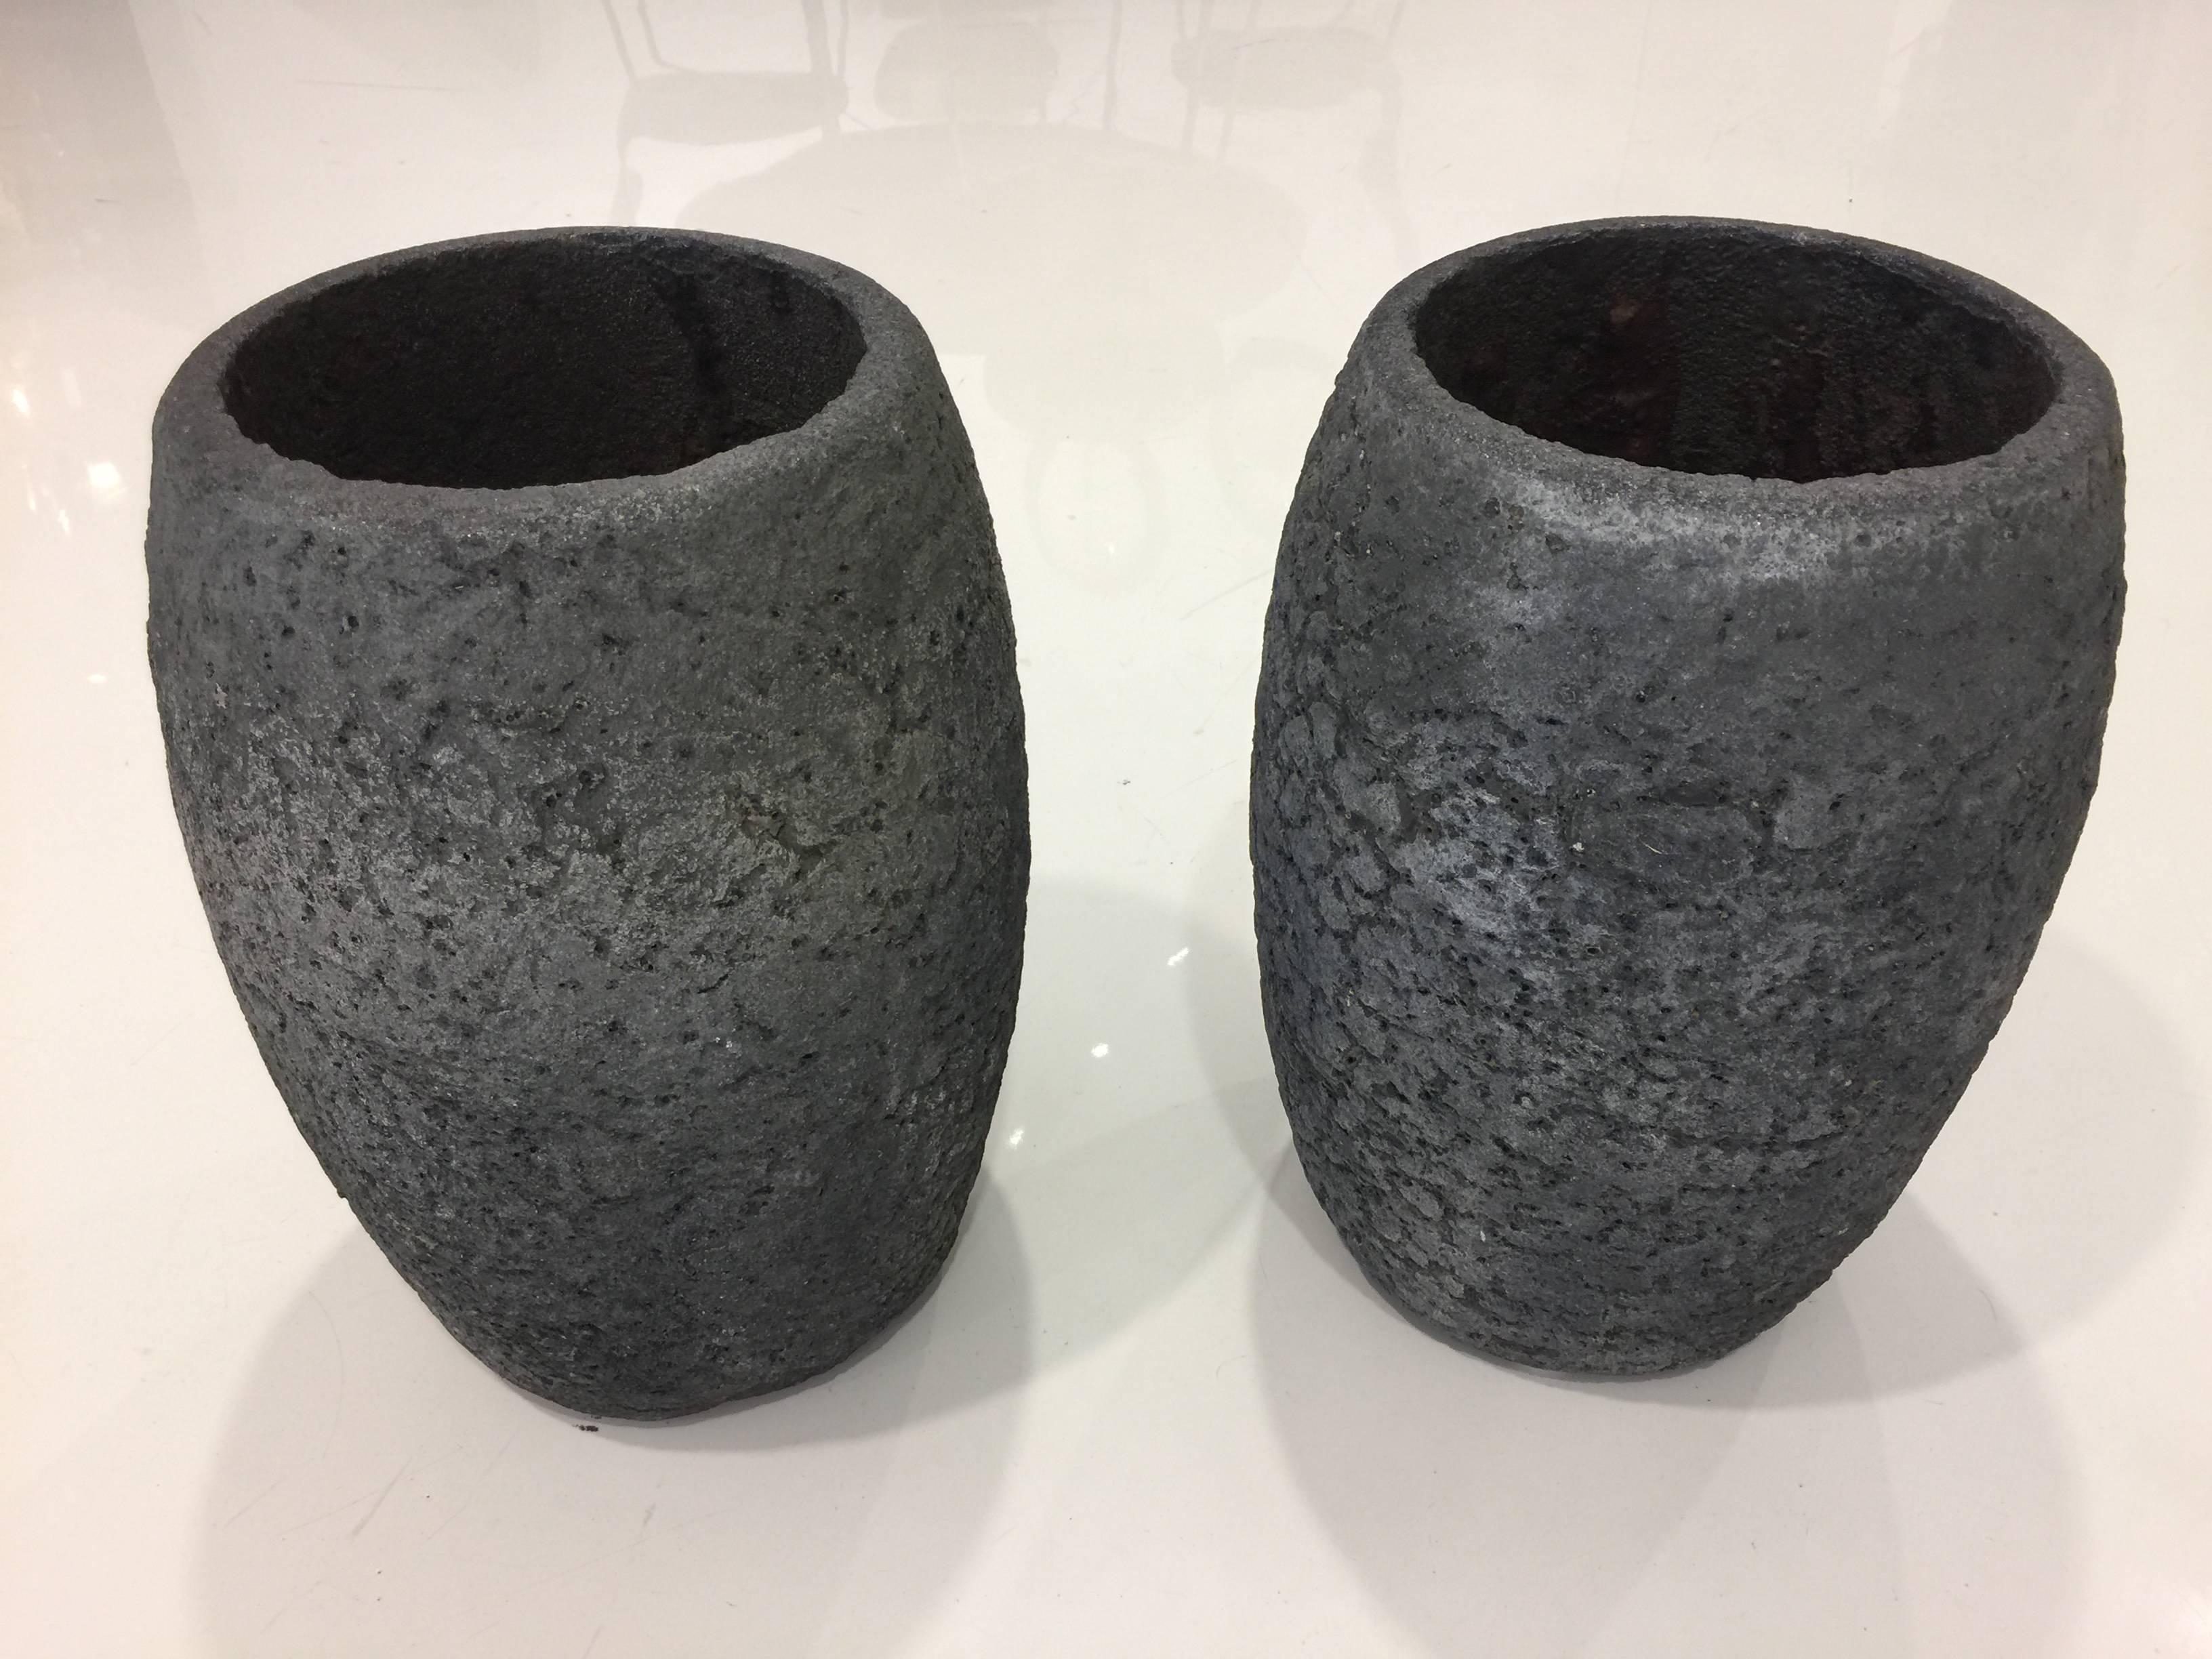 These very large crucibles were used for melting aluminum in an Industrial factory - now they have a beautiful aged coloring in dark volcanic grays. Very brutal finish.